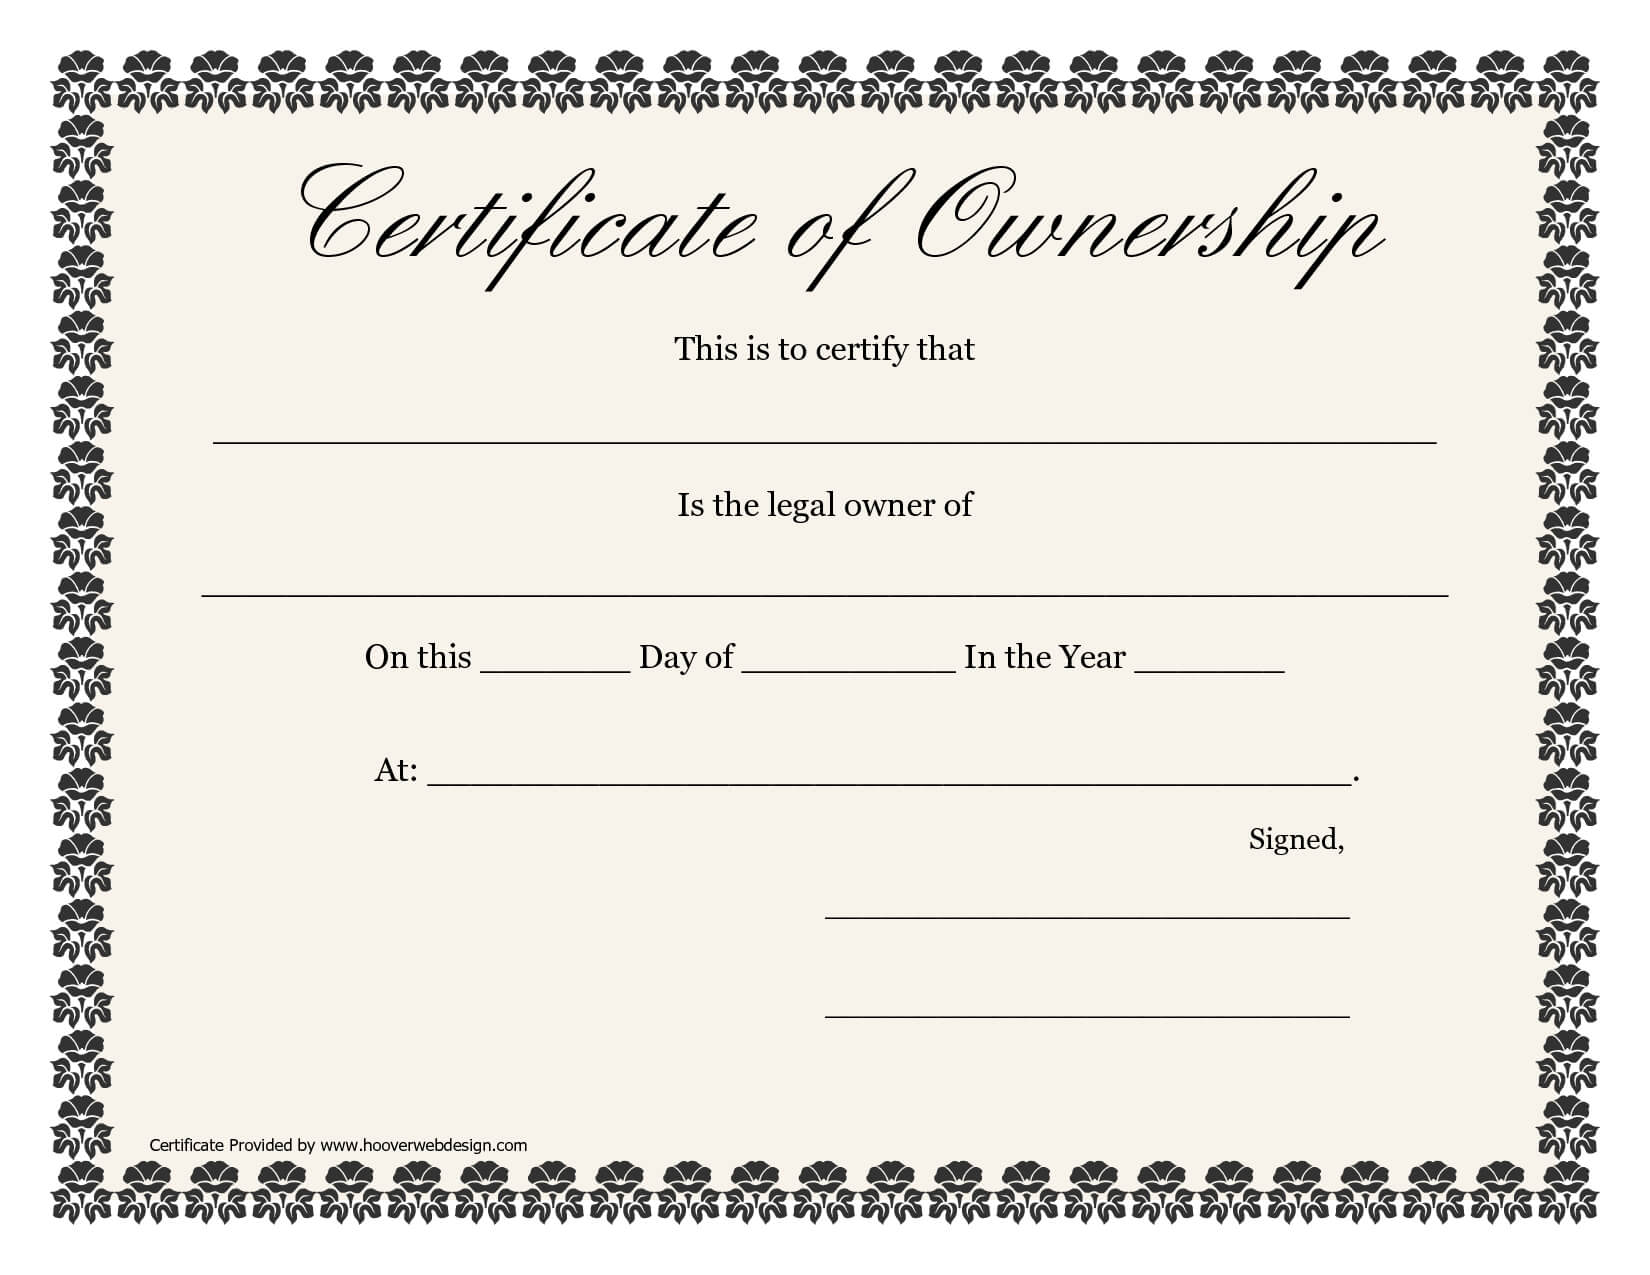 ❤️5+ Free Sample Of Certificate Of Ownership Form Template❤️ Pertaining To Certificate Of Ownership Template